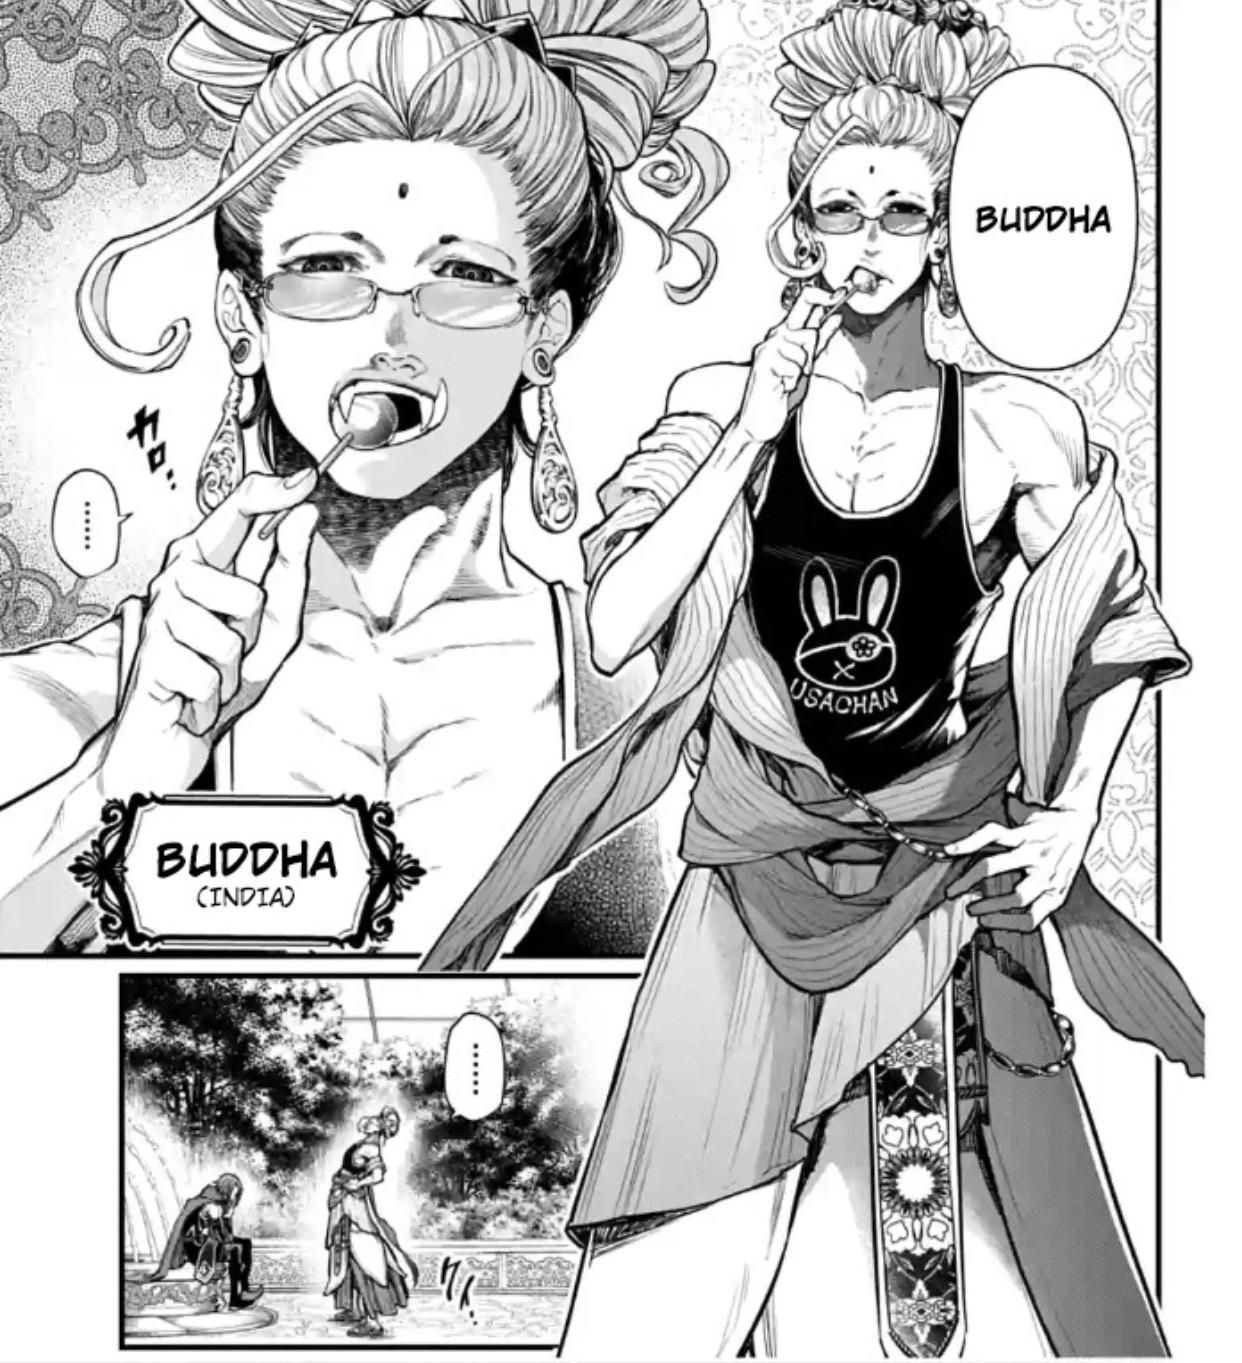 Buddha looks sick (Record of Ragnarok)follow up or reply to this content. Manga collection, Comic style art, Manga anime